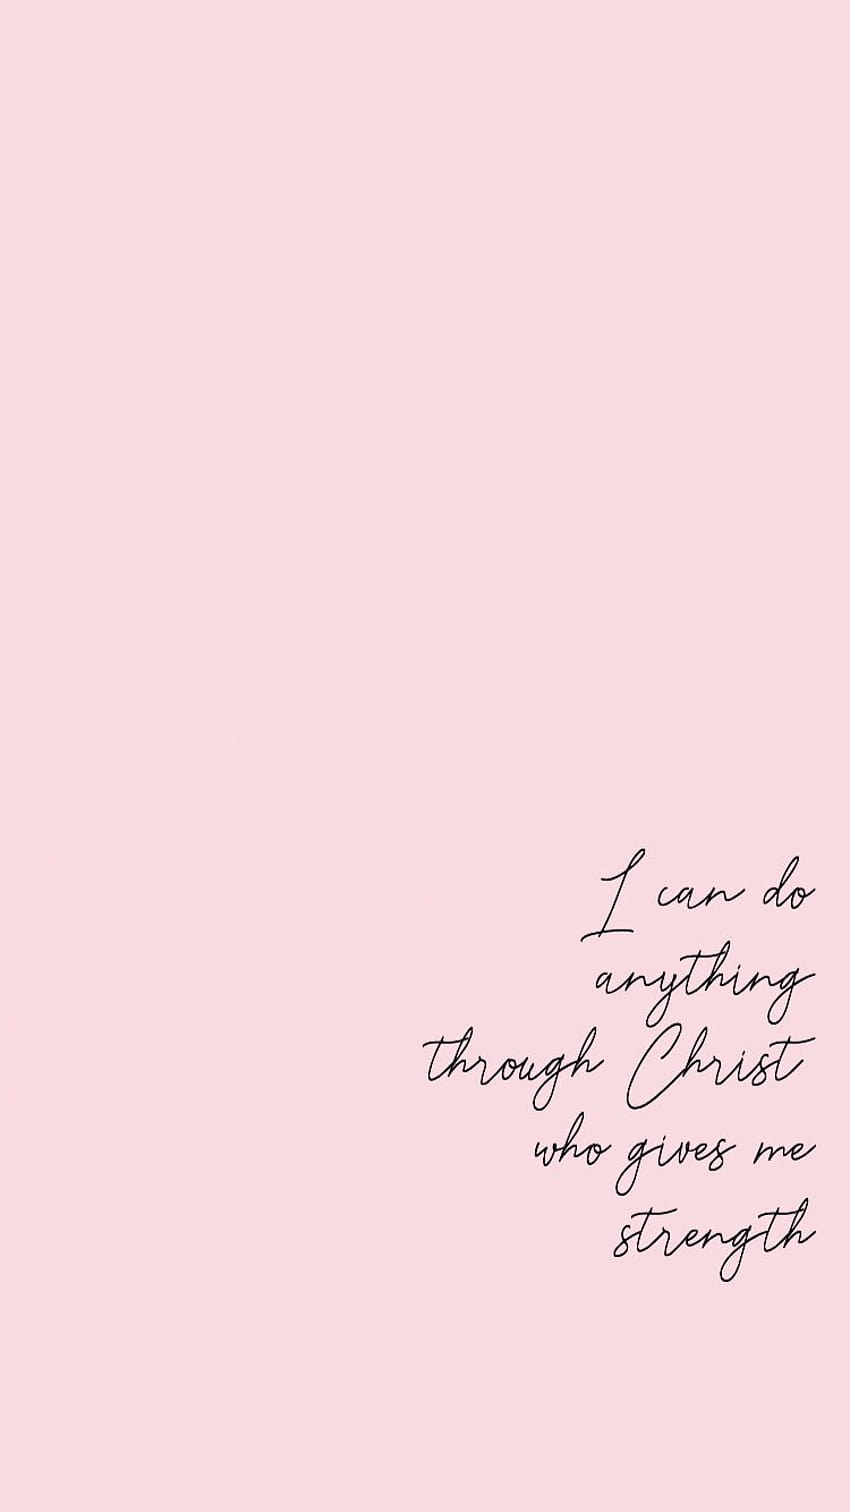 I can do everything through Christ., bible aesthetic HD phone wallpaper